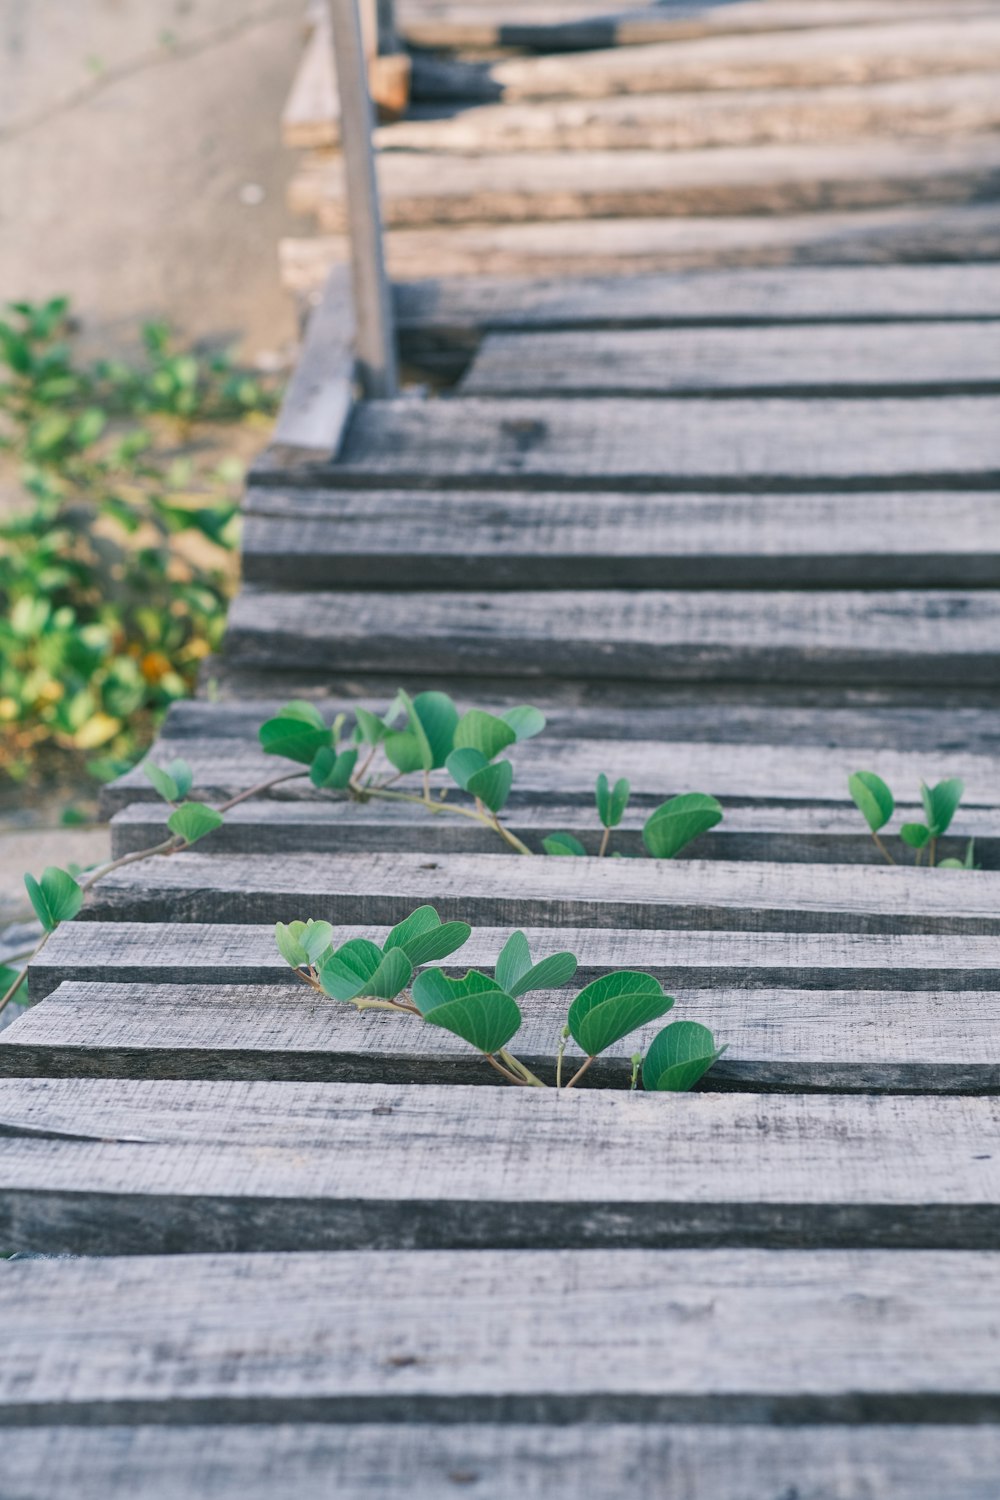 a group of wooden steps with plants growing on them